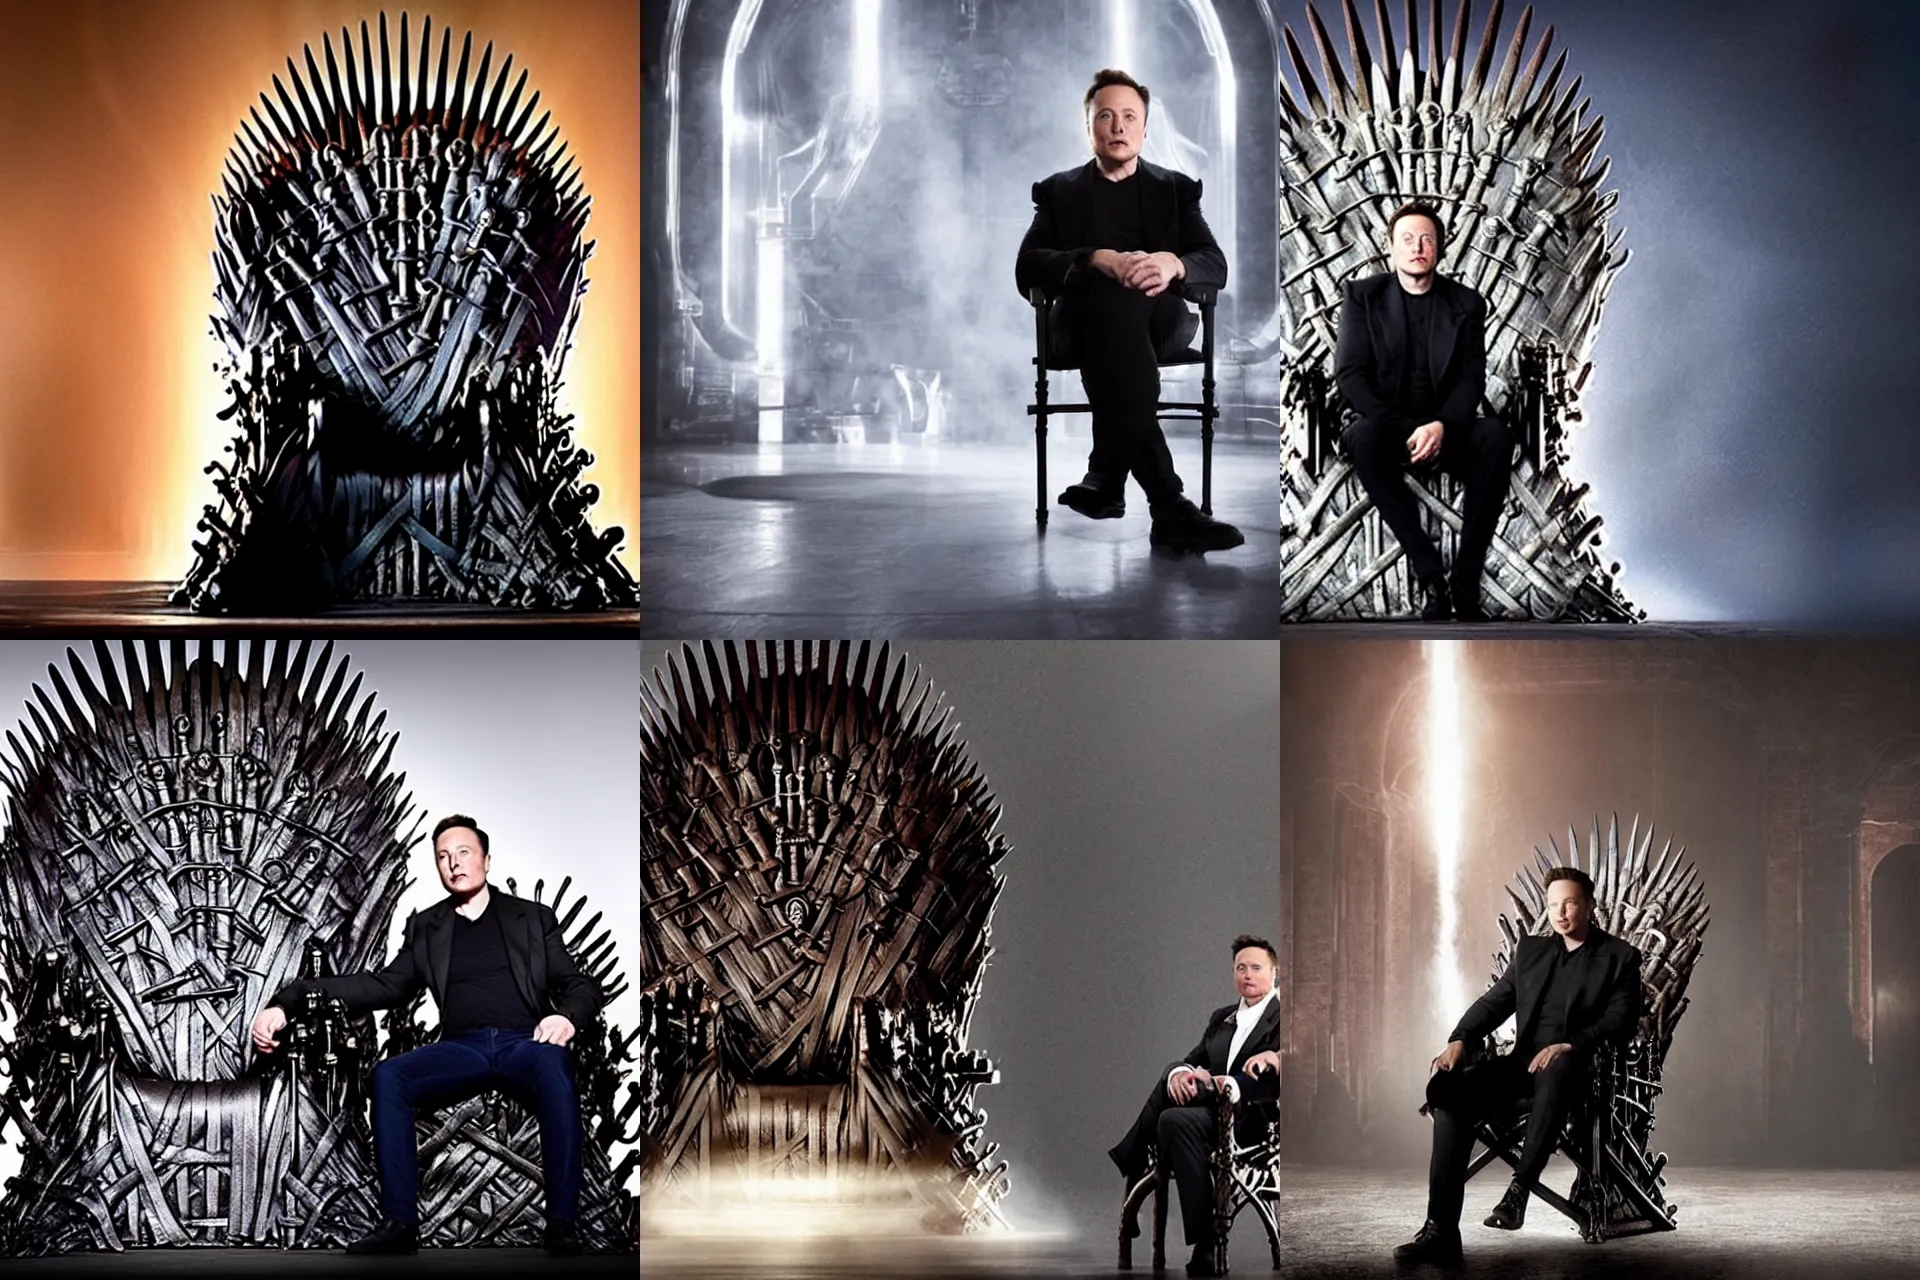 Prompt: Elon Musk seated in The Iron Throne; dramatic lighting